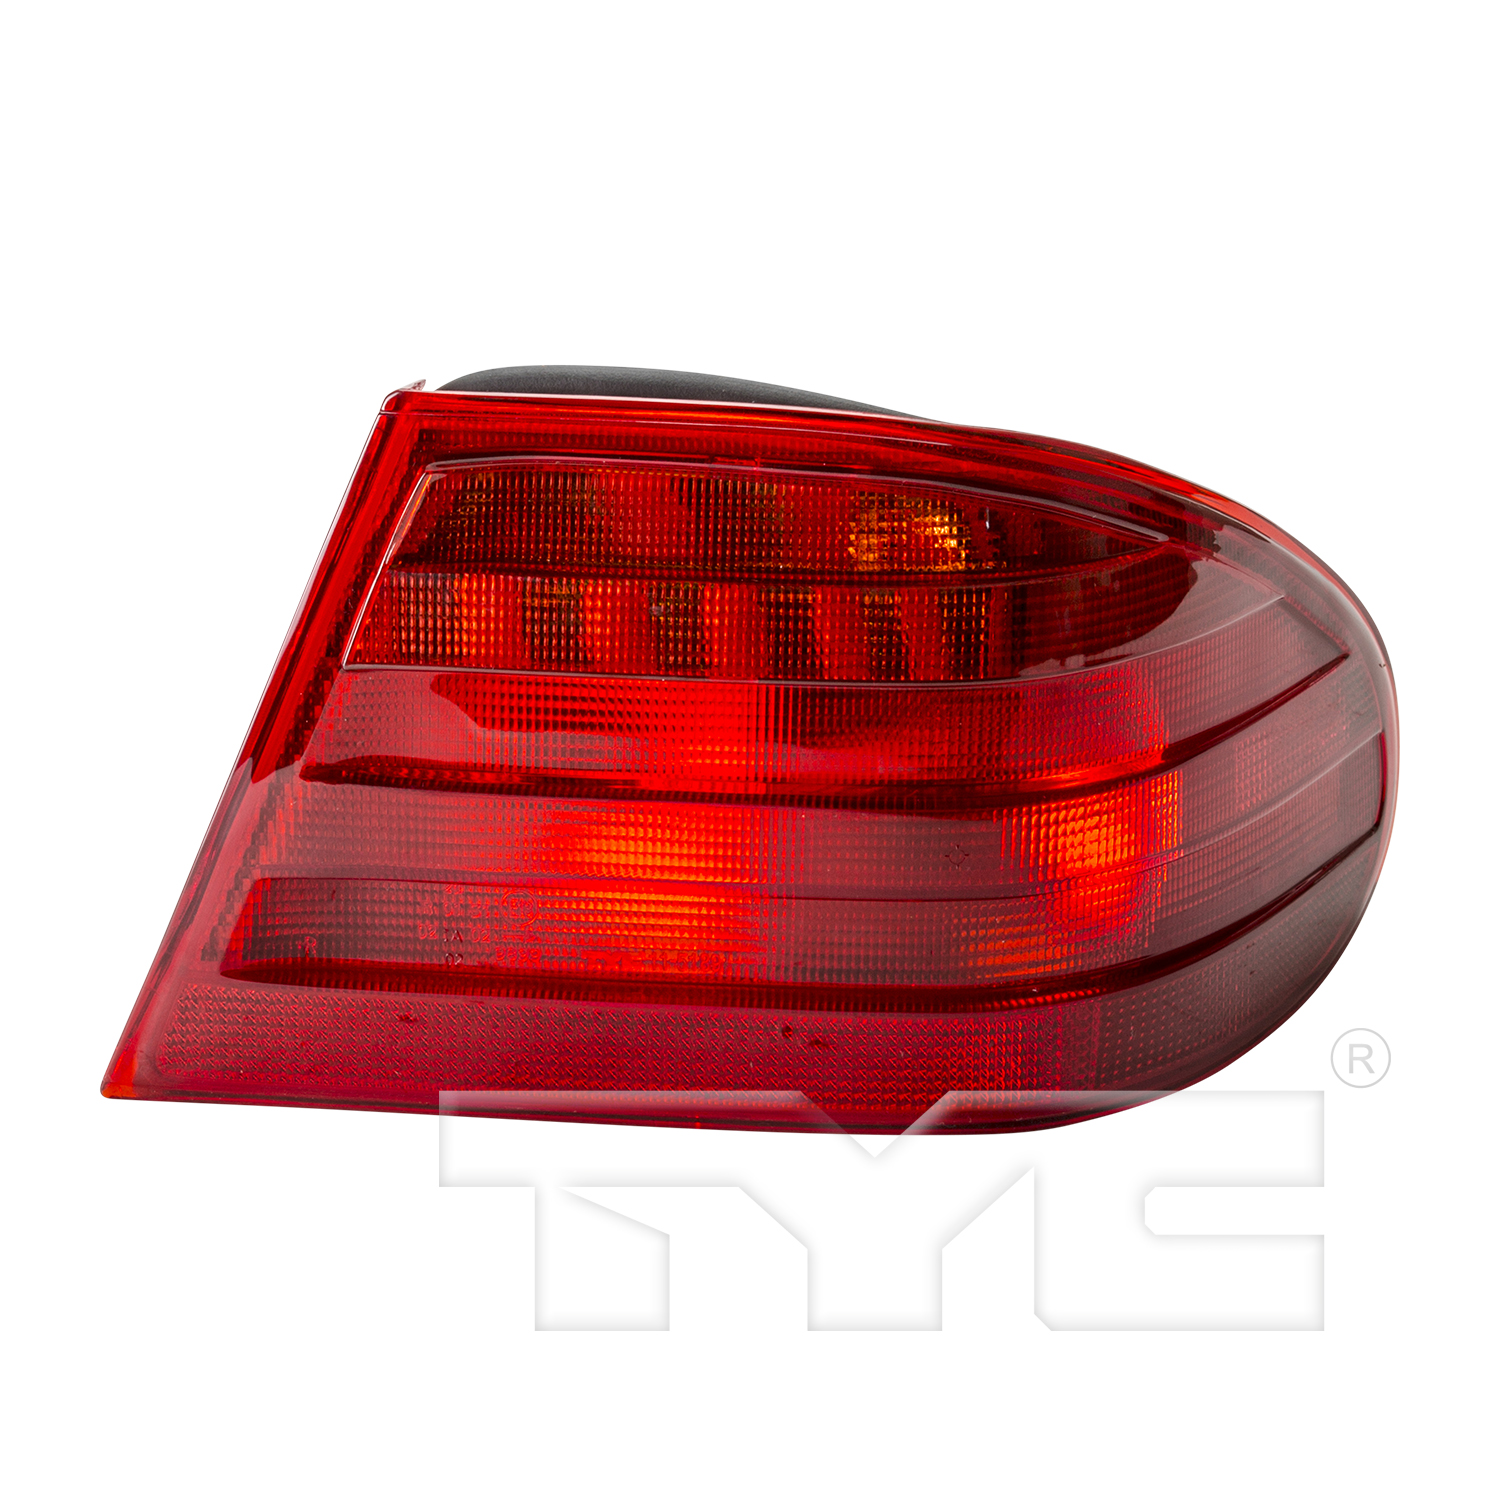 Aftermarket TAILLIGHTS for MERCEDES-BENZ - E430, E430,98-99,RT Taillamp assy outer